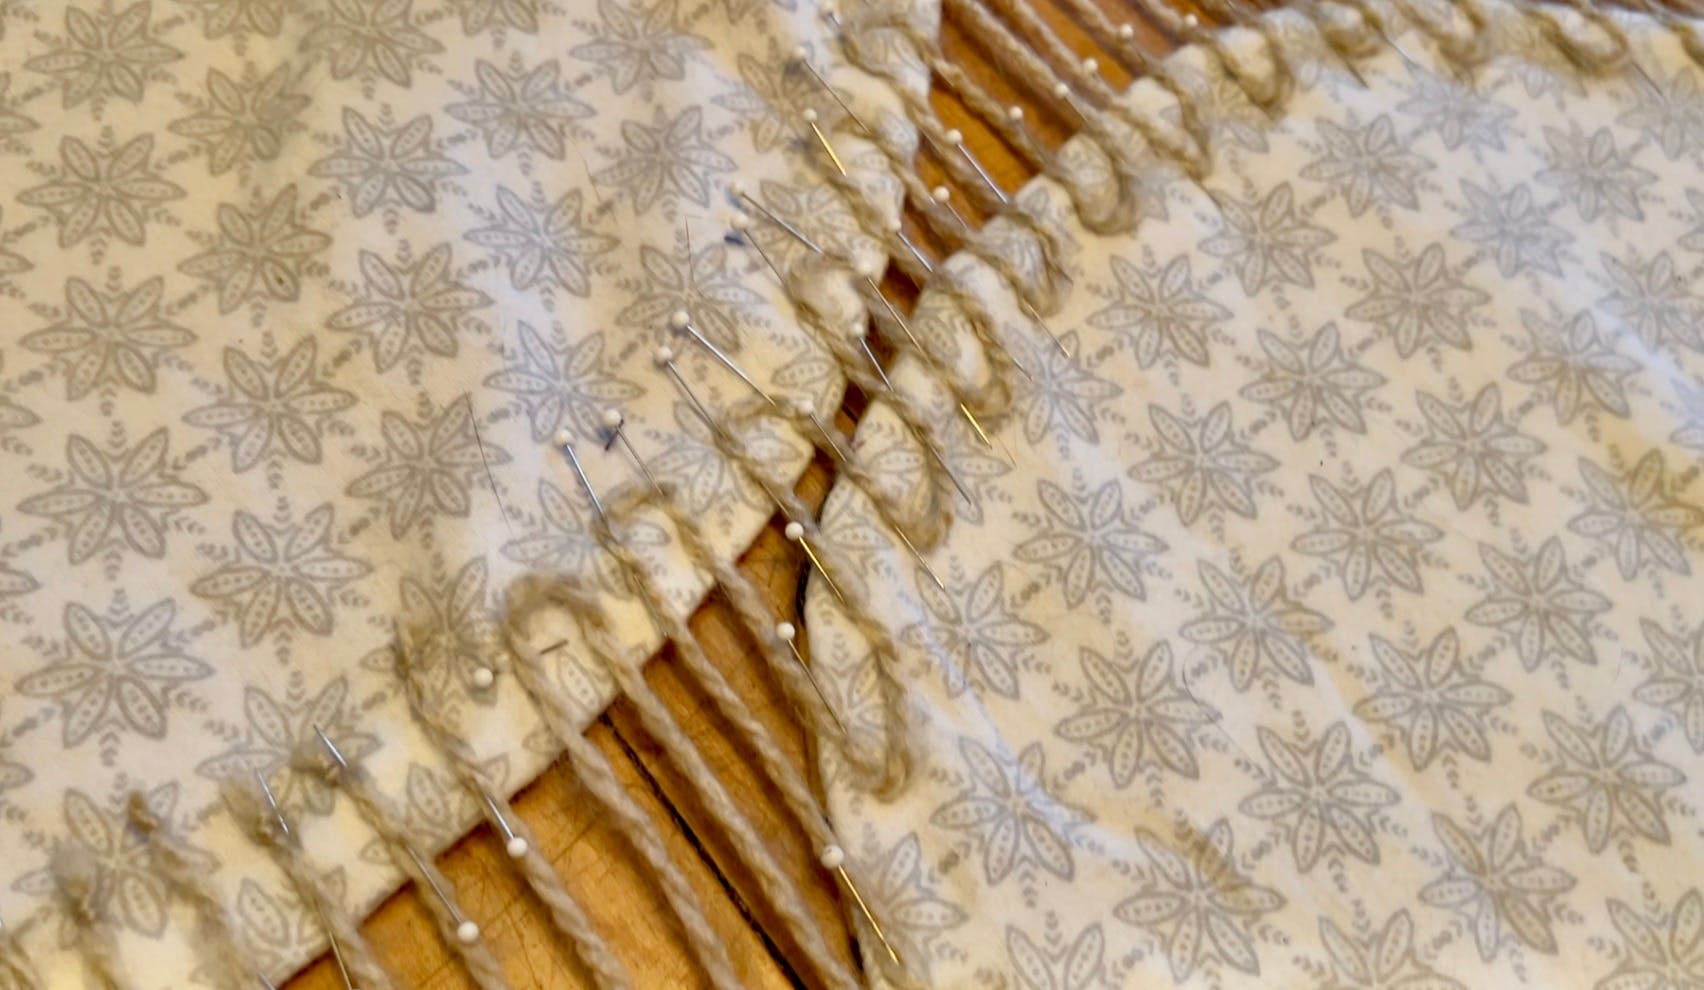 The pinned down yarn showing both methods - knotted yarns on the left and zig-zag yarn on the right